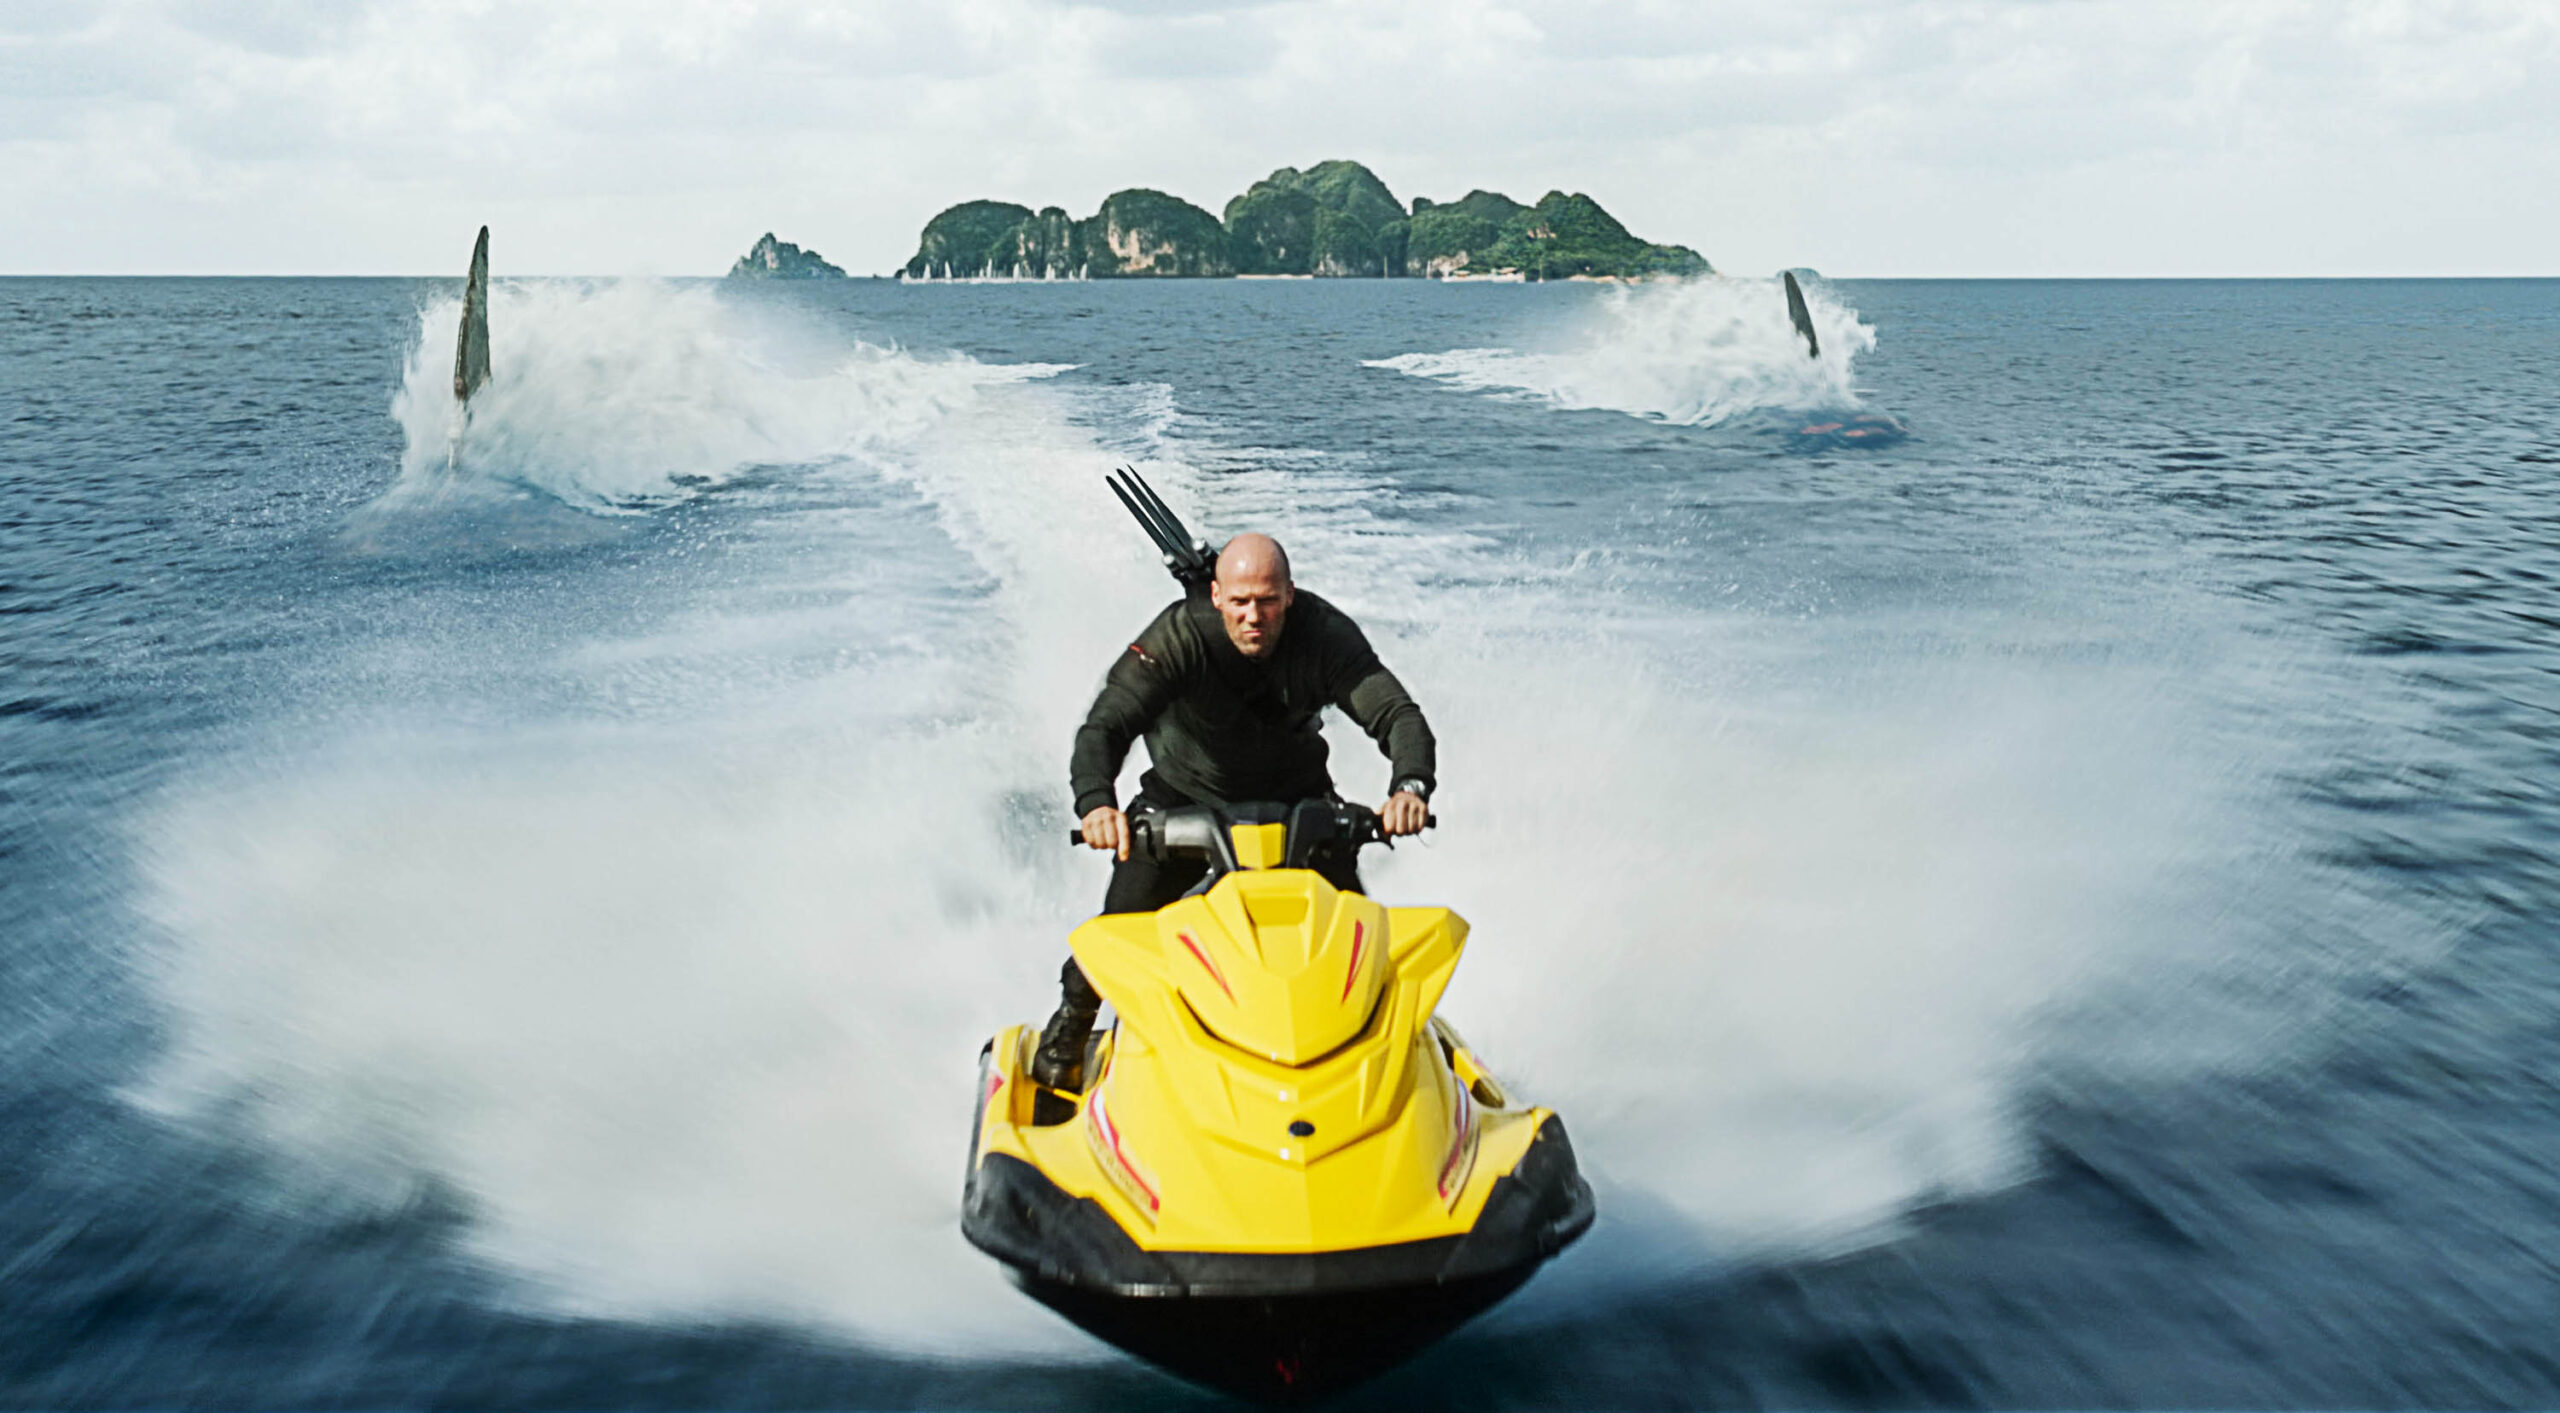 Jason Statham come Jonas in Shark 2 - L'Abisso [tag: Jason Statham] [credit: Copyright 2023 Warner Bros. Entertainment Inc. All Rights Reserved; courtesy Warner Bros. Pictures]